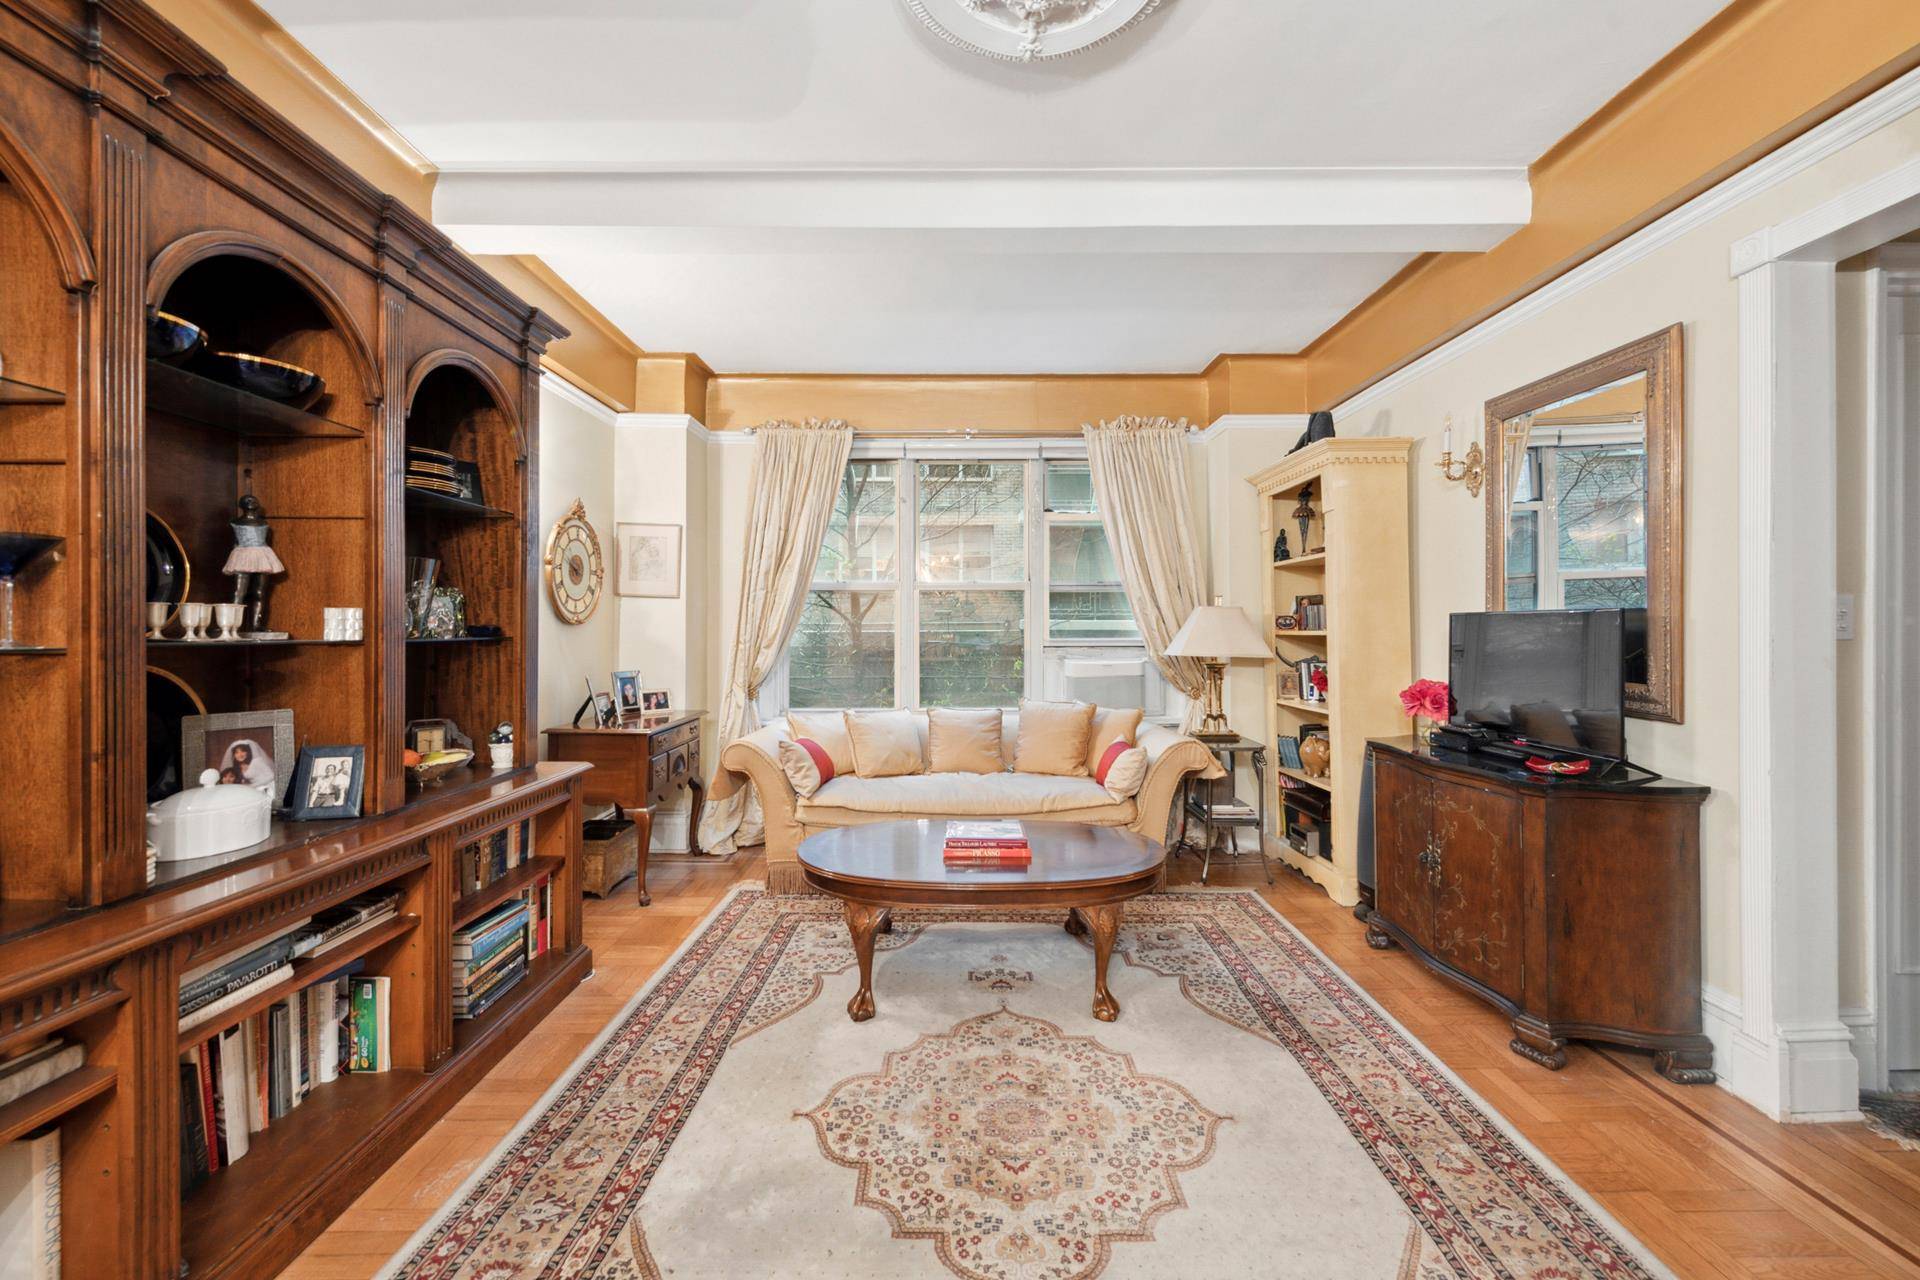 Pre war sophisticated living awaits you on the Upper East Side one of Manhattan's most desirable locations minutes from Central Park, shopping and restaurants galore !